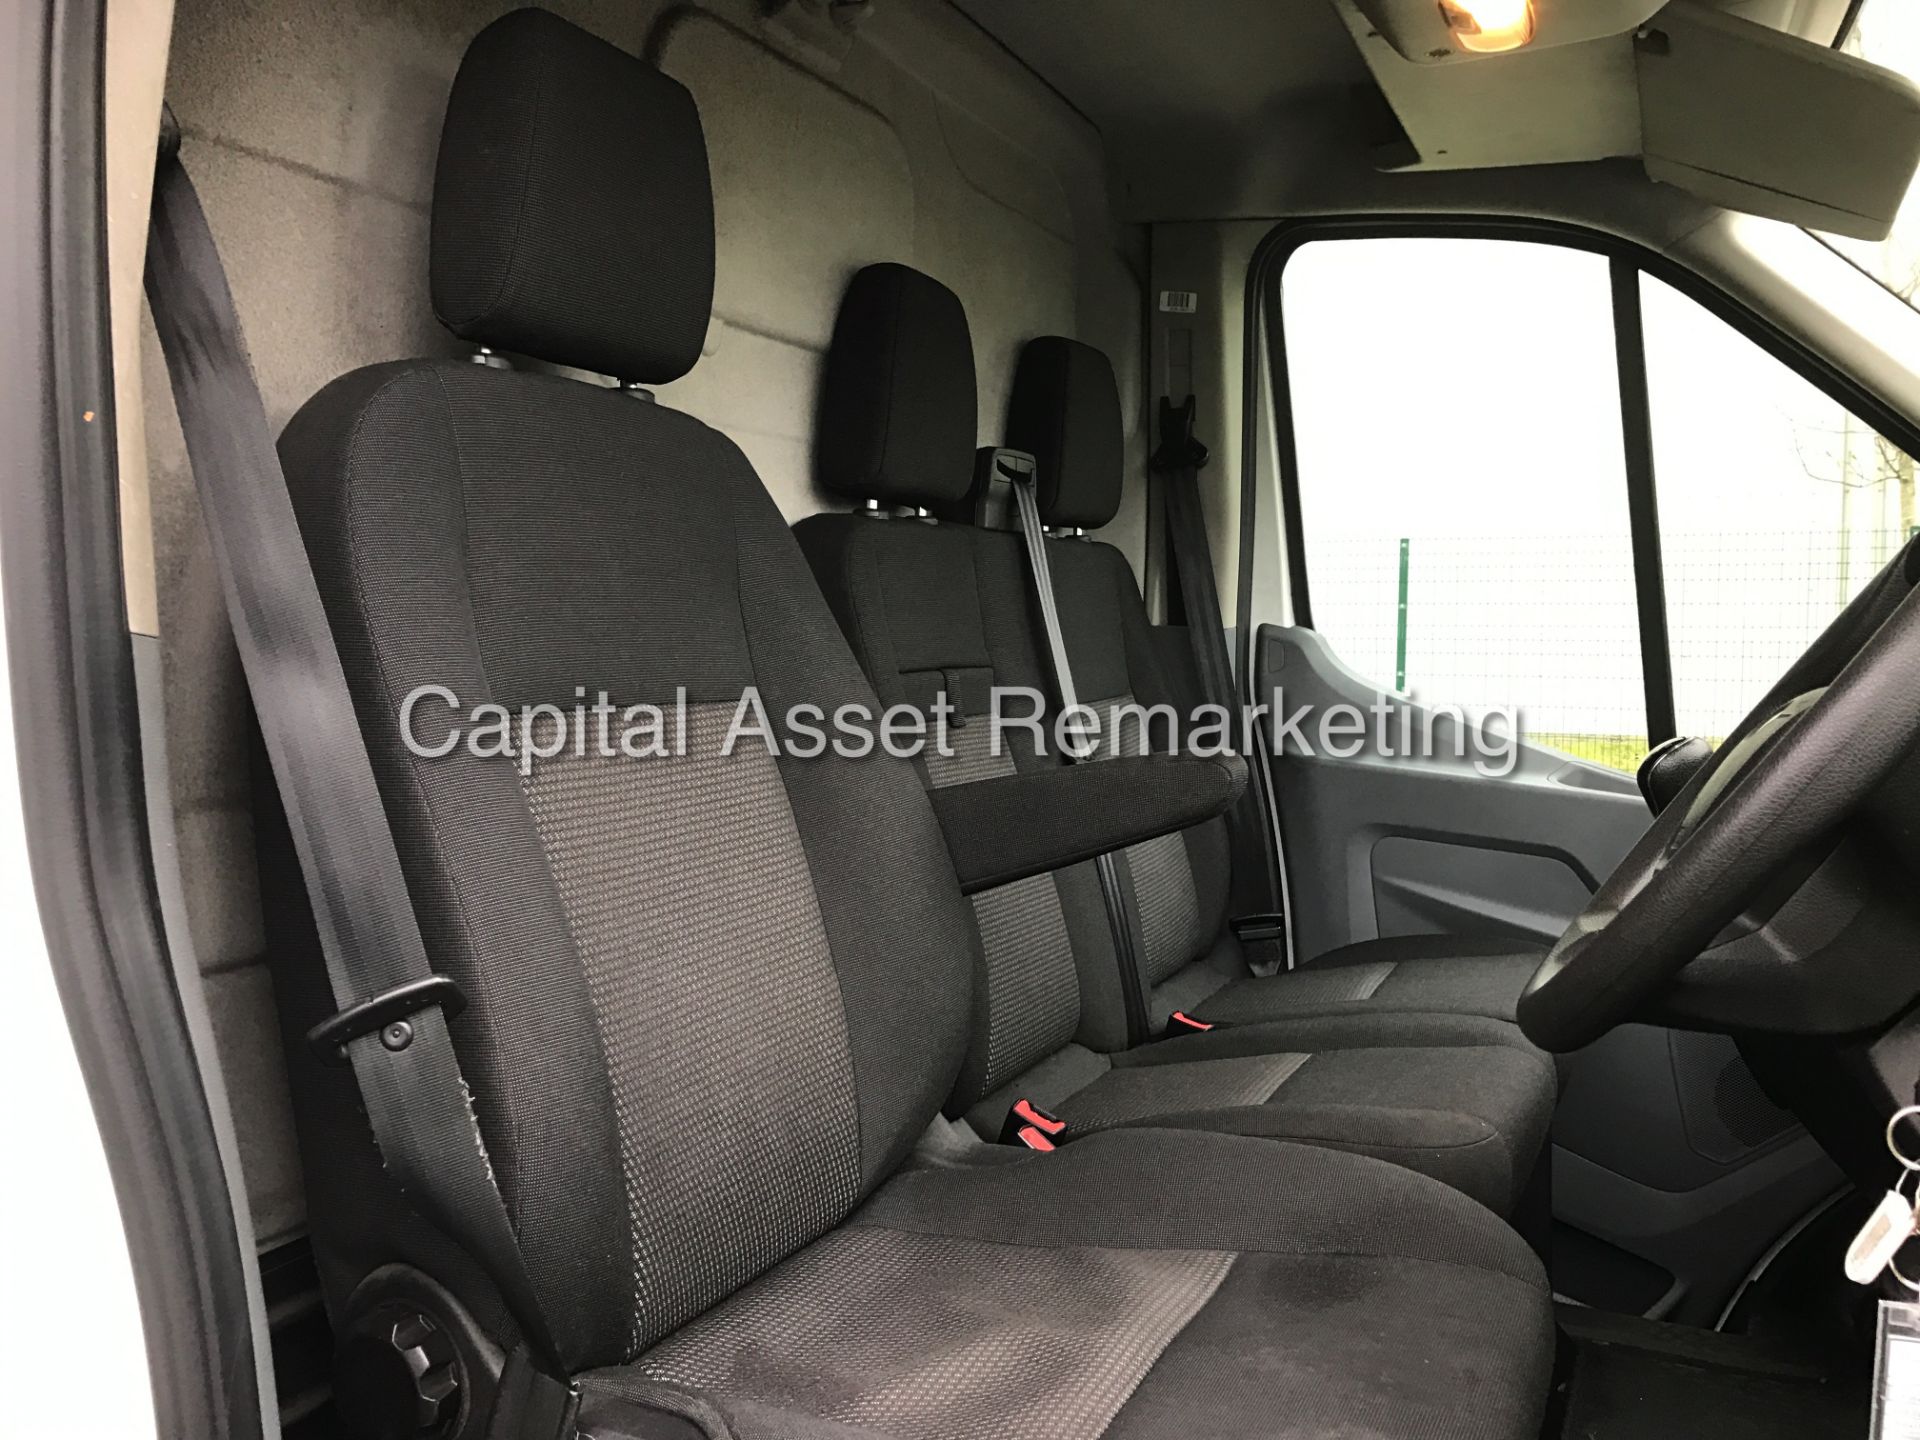 (ON SALE) FORD TRANSIT 2.2TDCI "125BHP - 6 SPEED" 350 LONG WHEEL BASE/ HIGH ROOF "NEW SHAPE" - Image 6 of 10